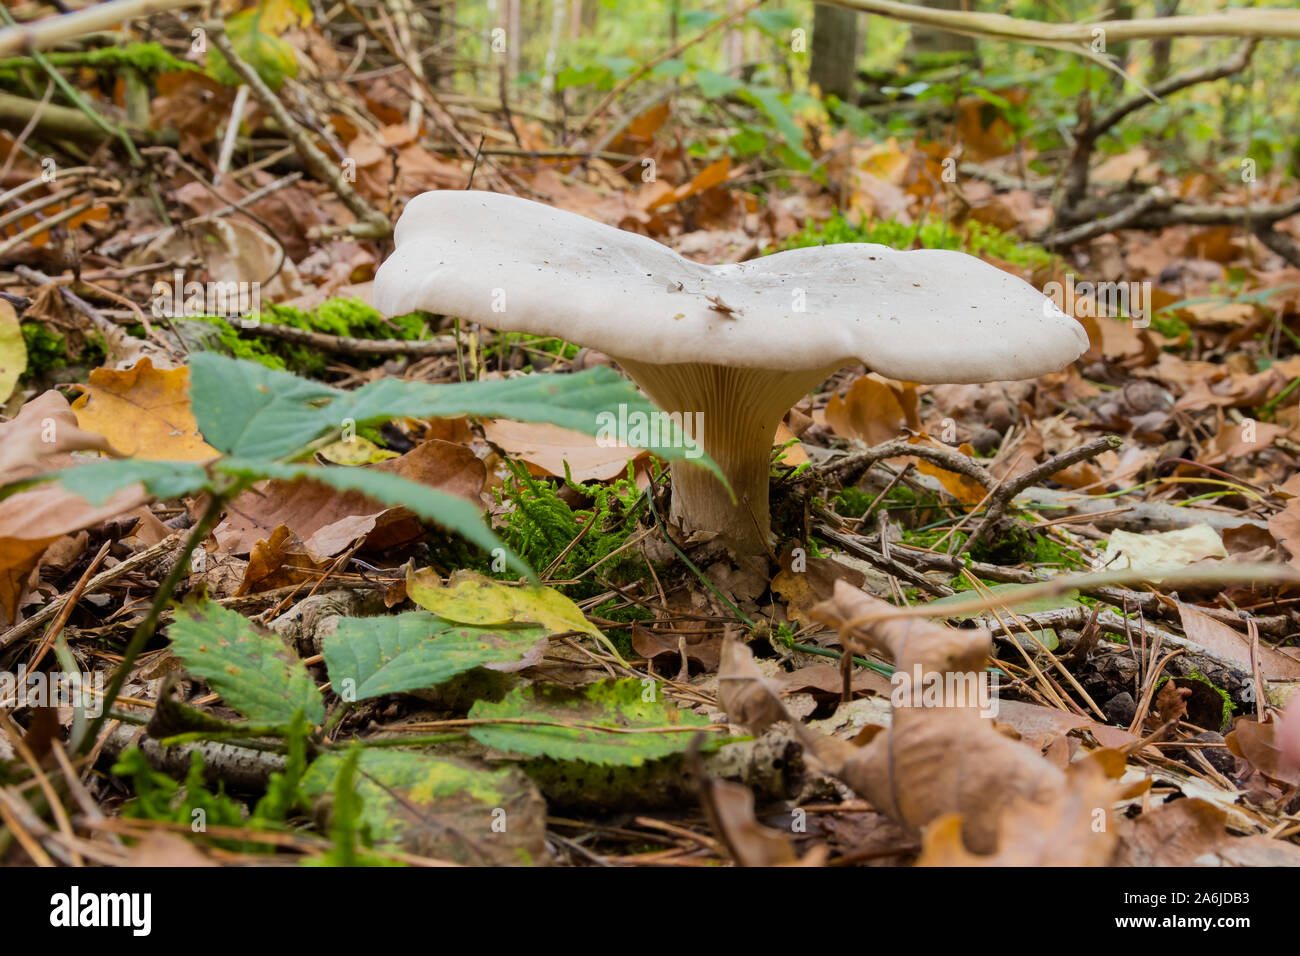 Lactarius vellereus or Lactarius piperatus is large white gilled and edible mushroom with a flat cap common in Europe and America Stock Photo